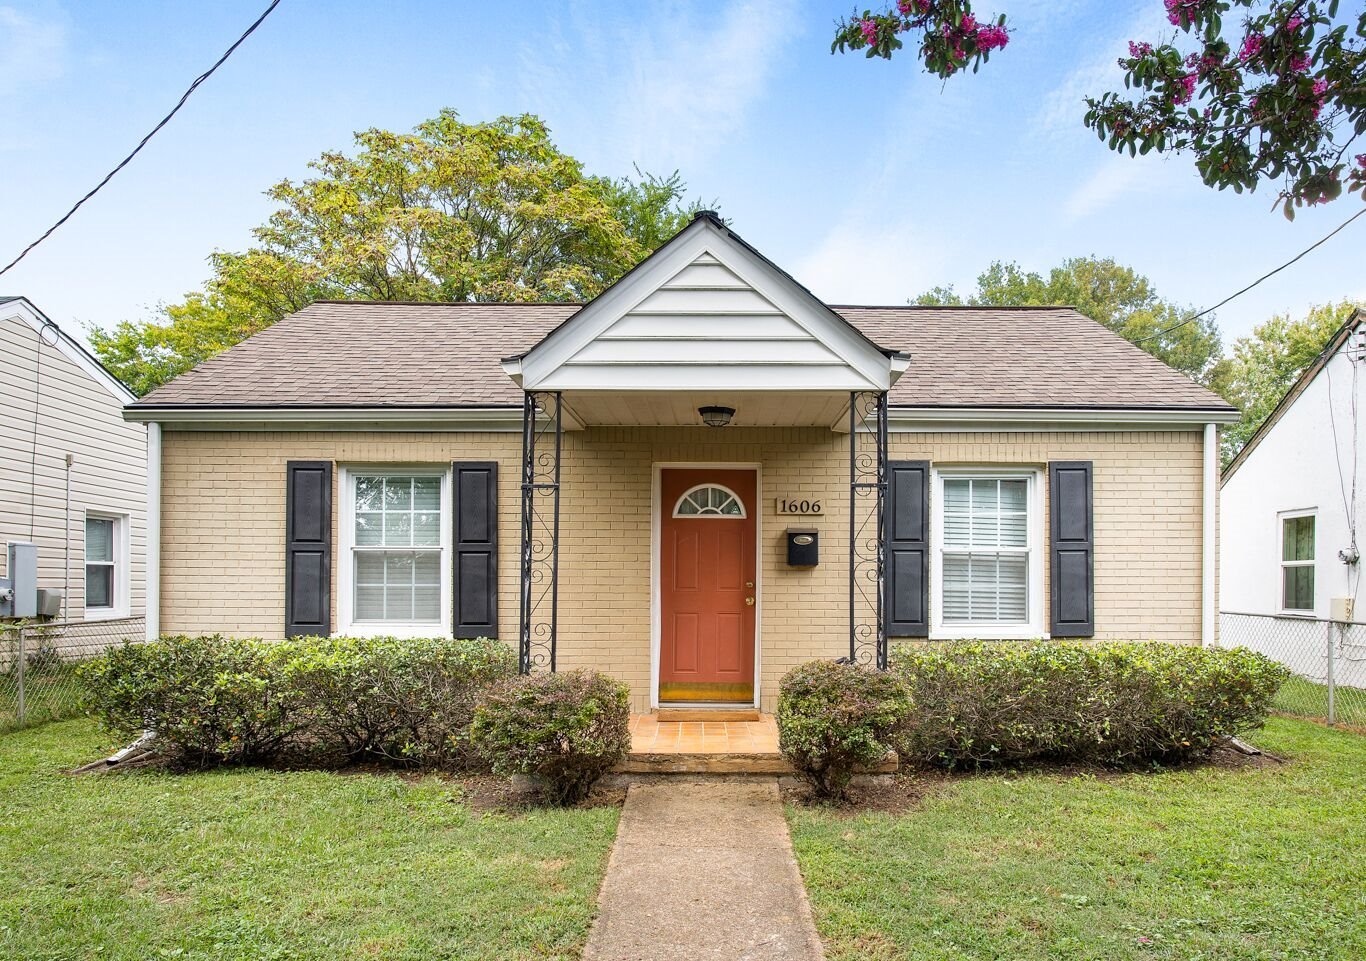 Adorable Bungalow in the heart of Randolph.